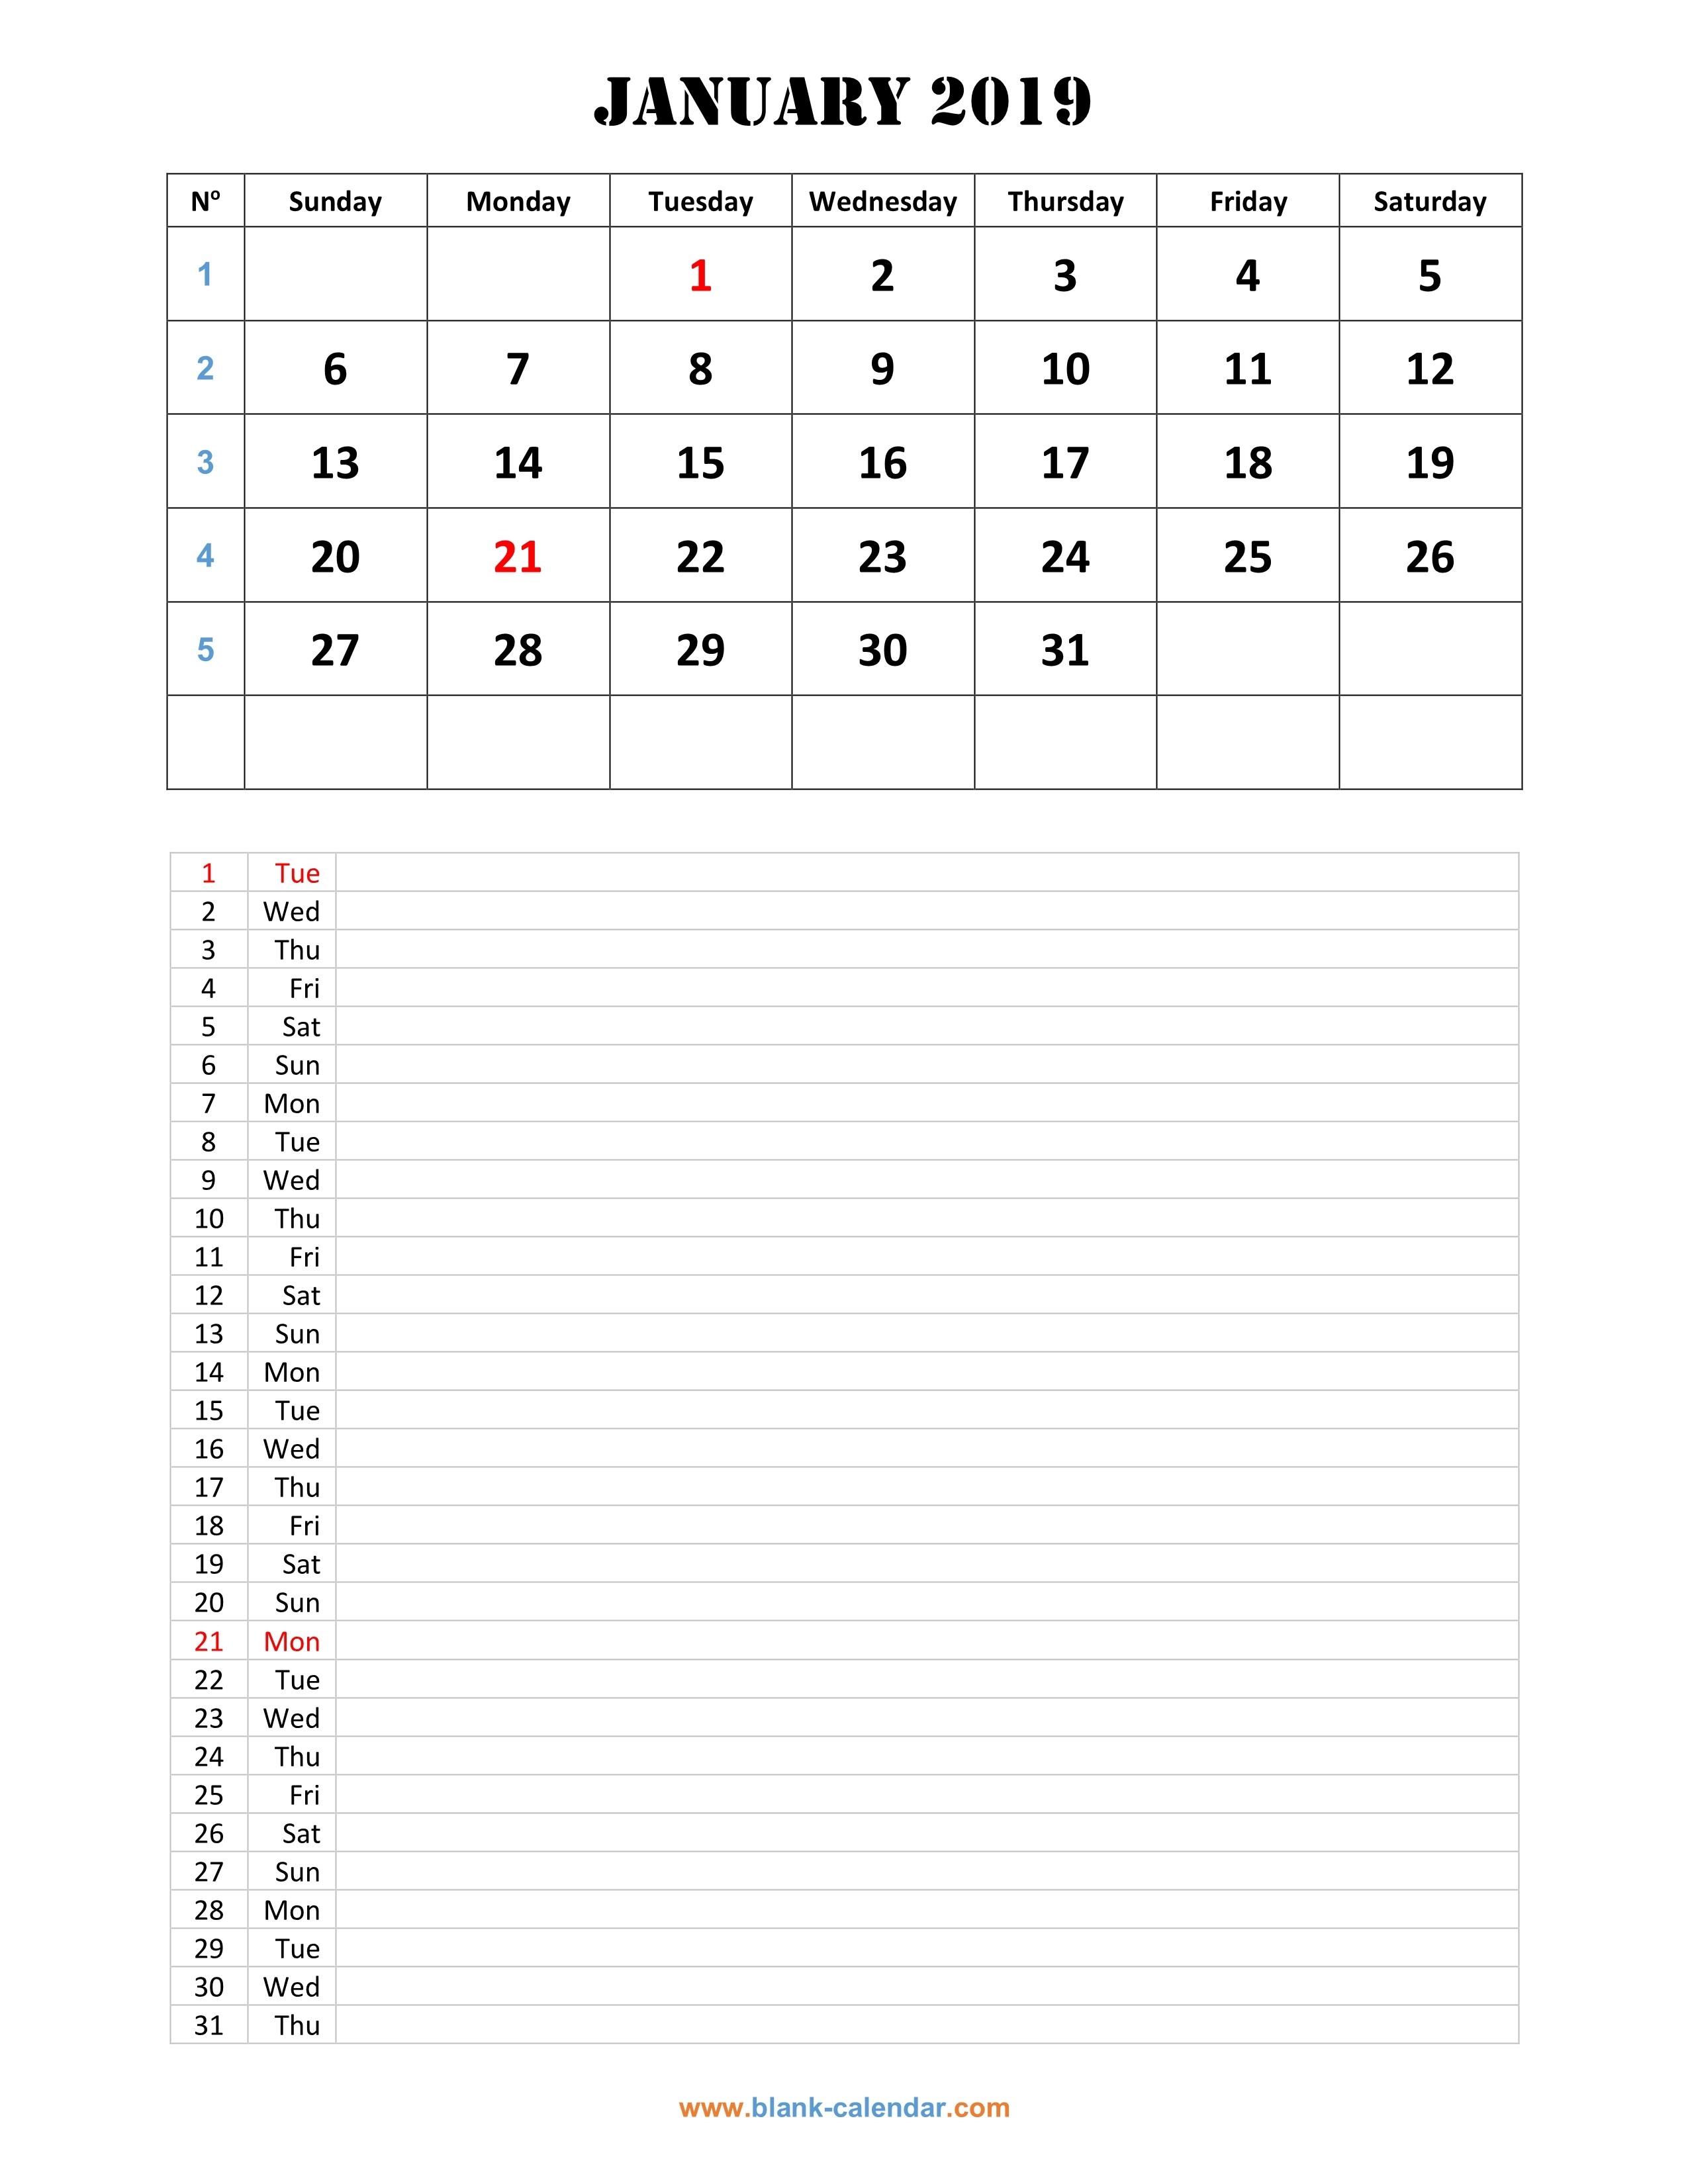 Monthly Calendar 2019 | Free Download, Editable And Printable-Monthly Calendar That Can Be Edited